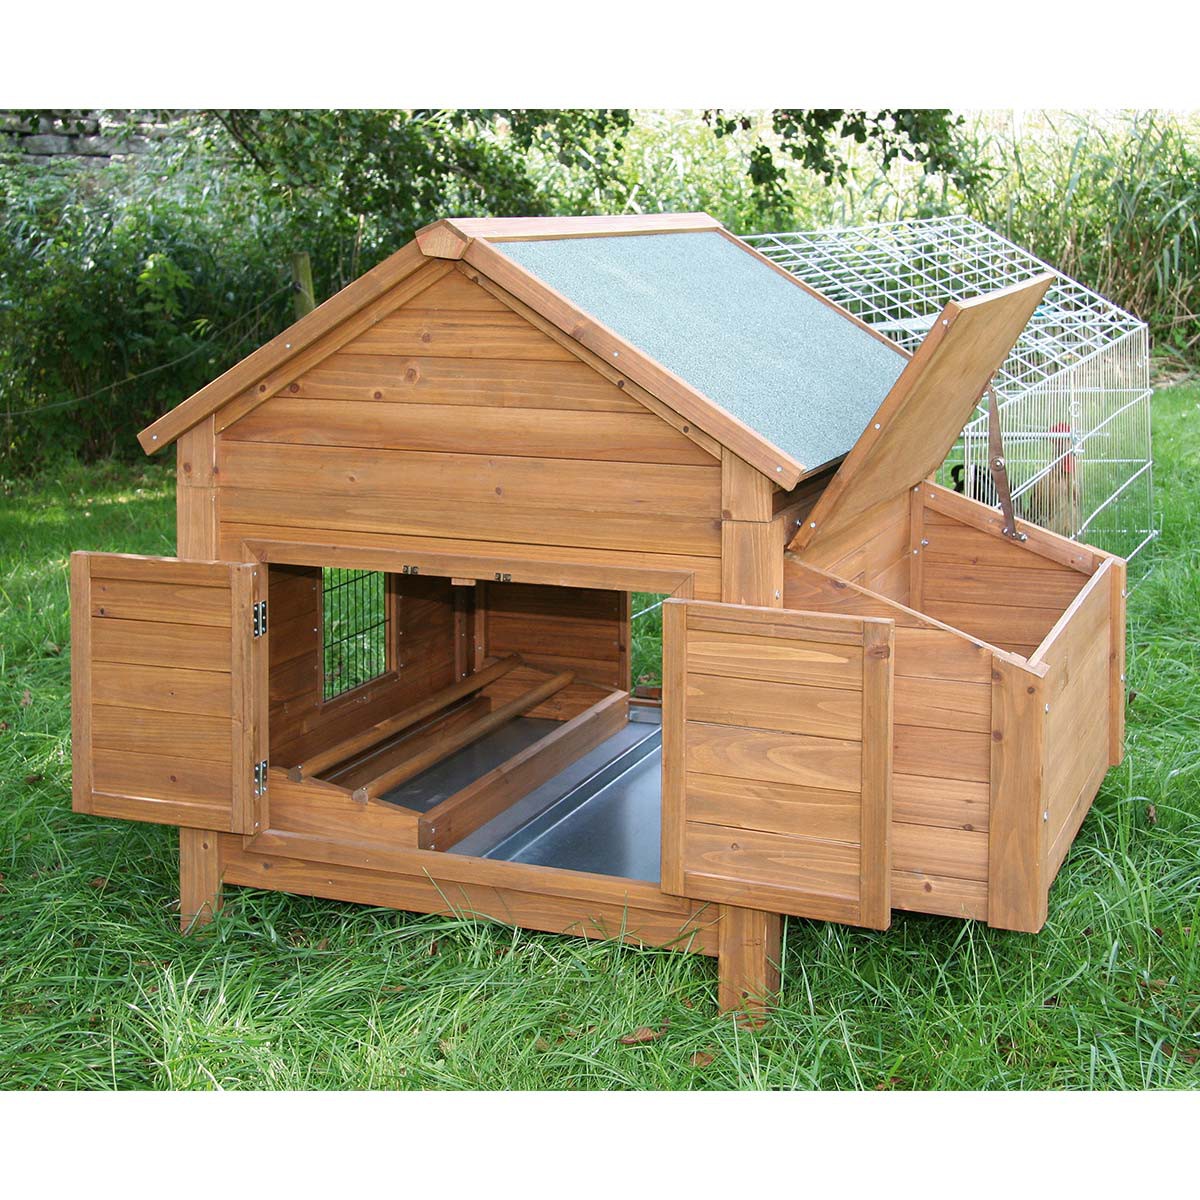 Laying nest for animal hutch 82807 85 x 37 x 48 cm